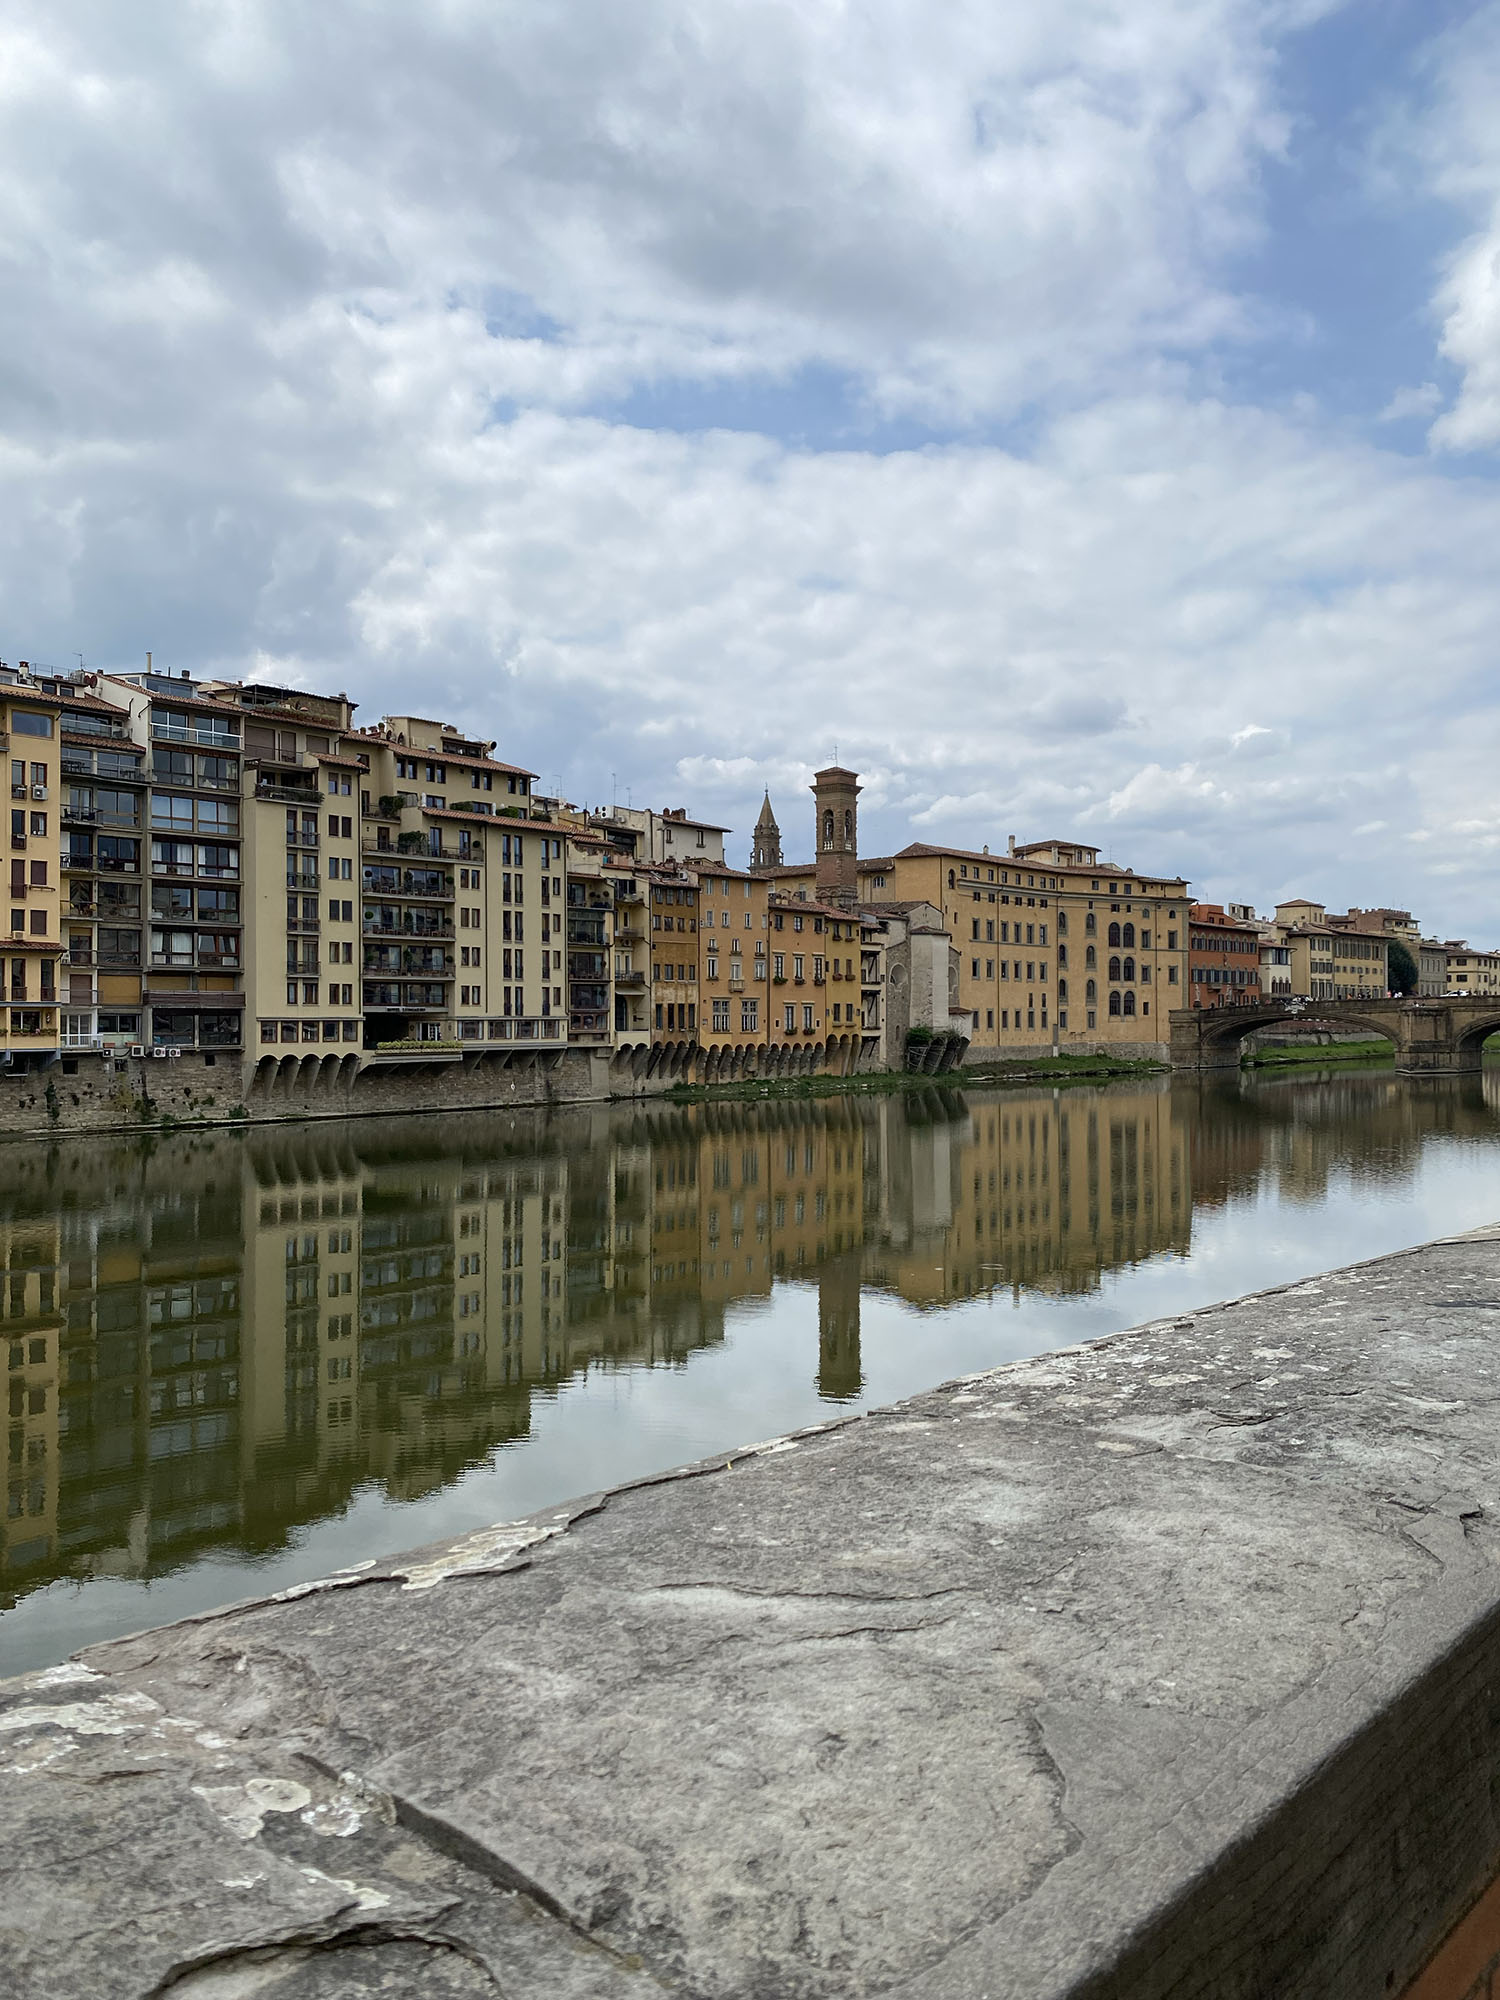 Coco & Vera - View of Altarno in Florence, Italy